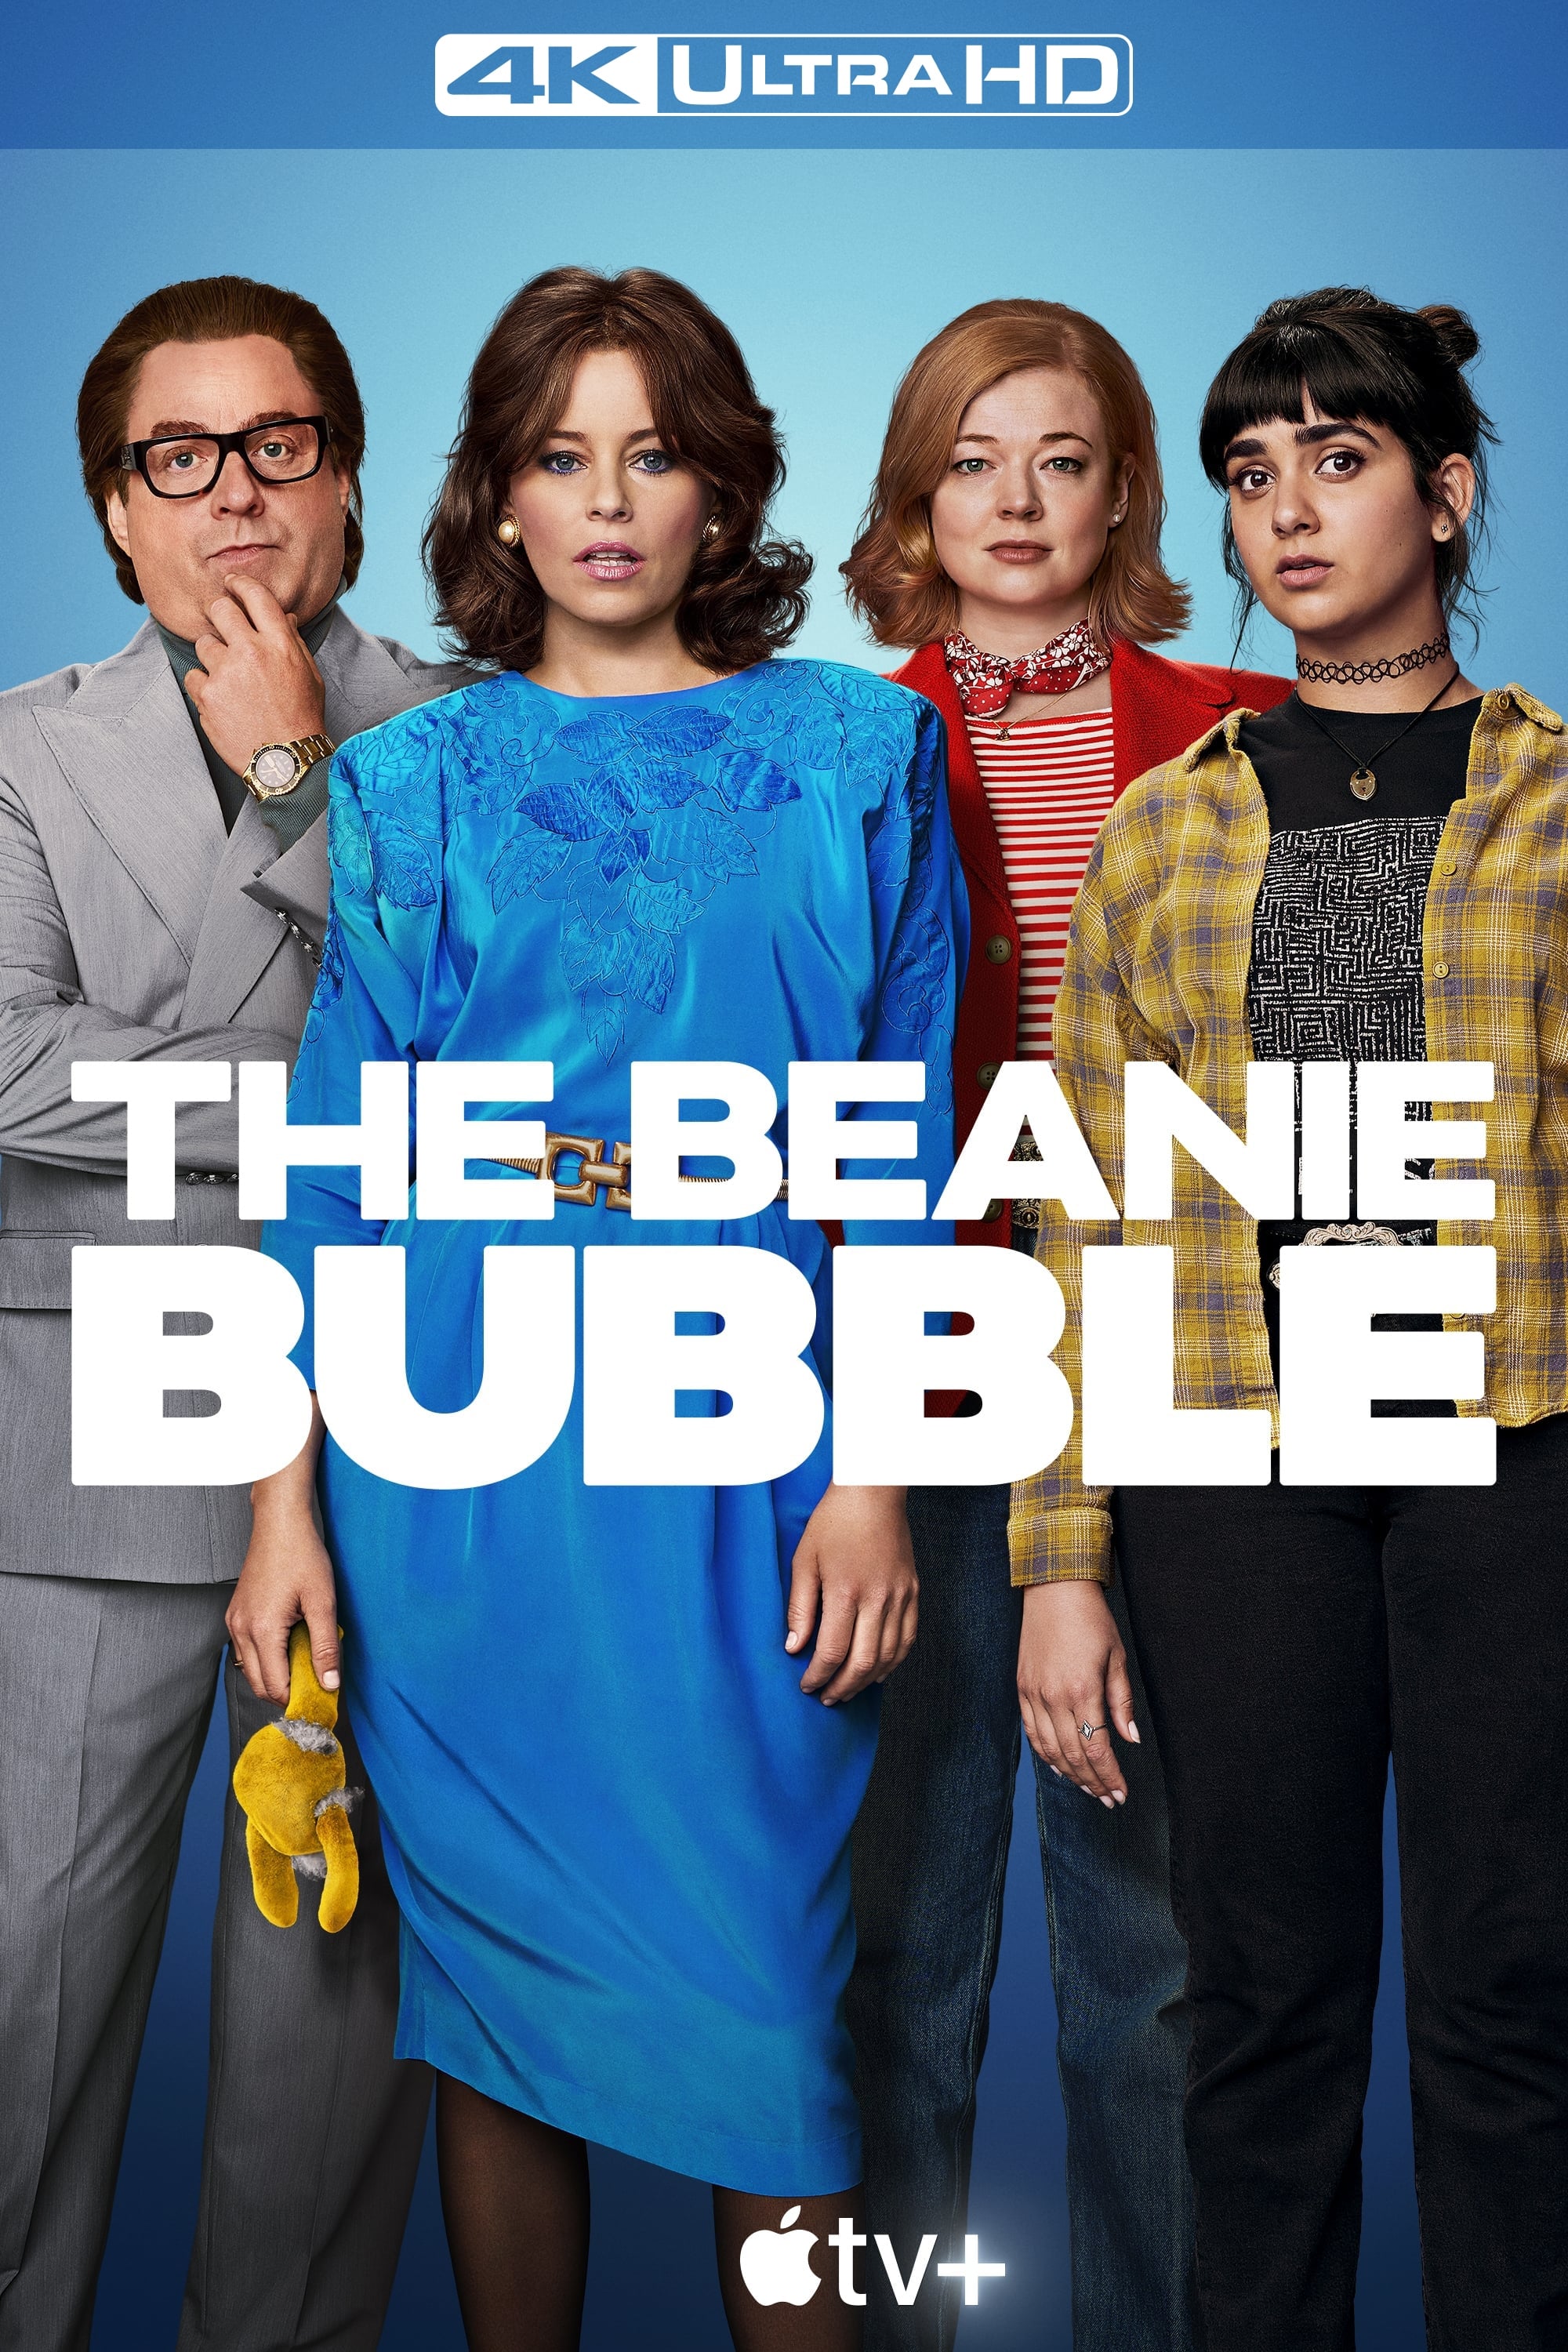 [WATCH 46+] The Beanie Bubble (2023) FULL MOVIE ONLINE FREE ENGLISH/Dub/SUB Comedy STREAMINGS ������ Movie Poster